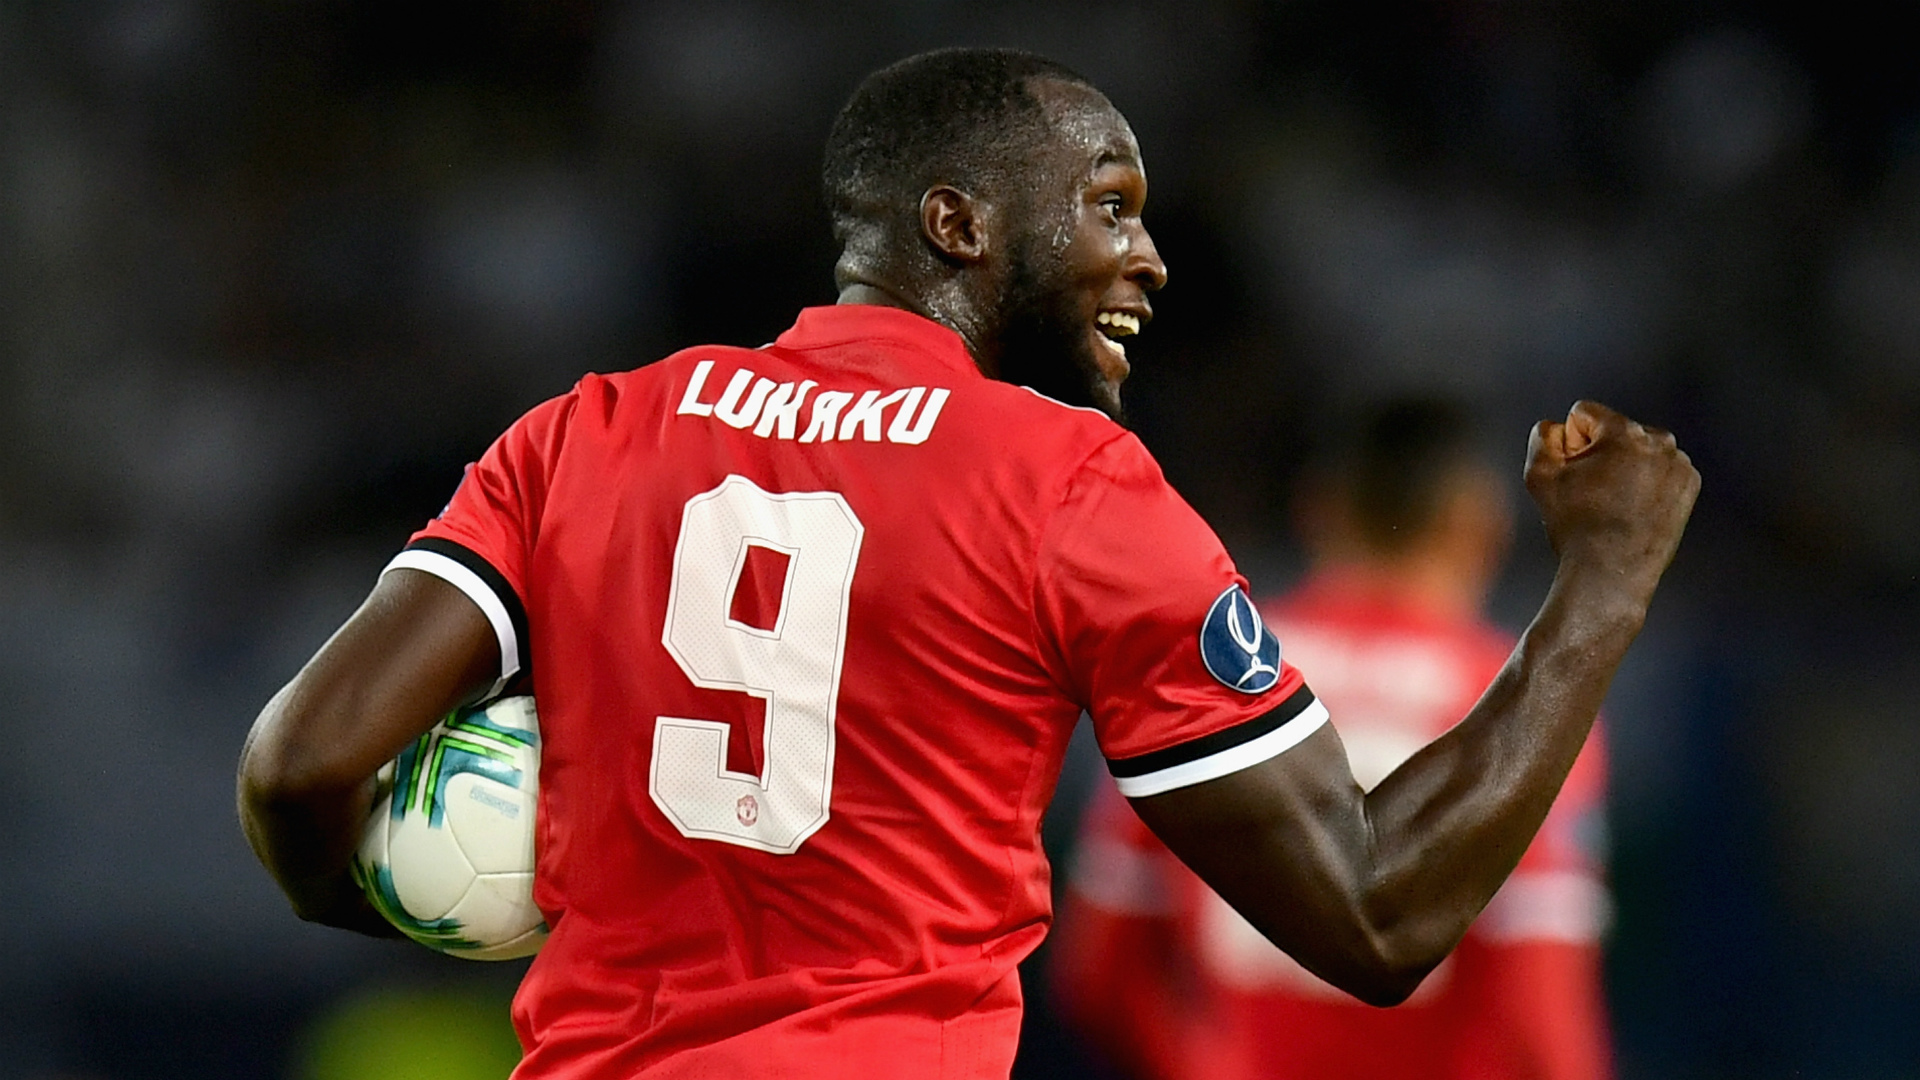 Lukaku discusses Manchester United release clause